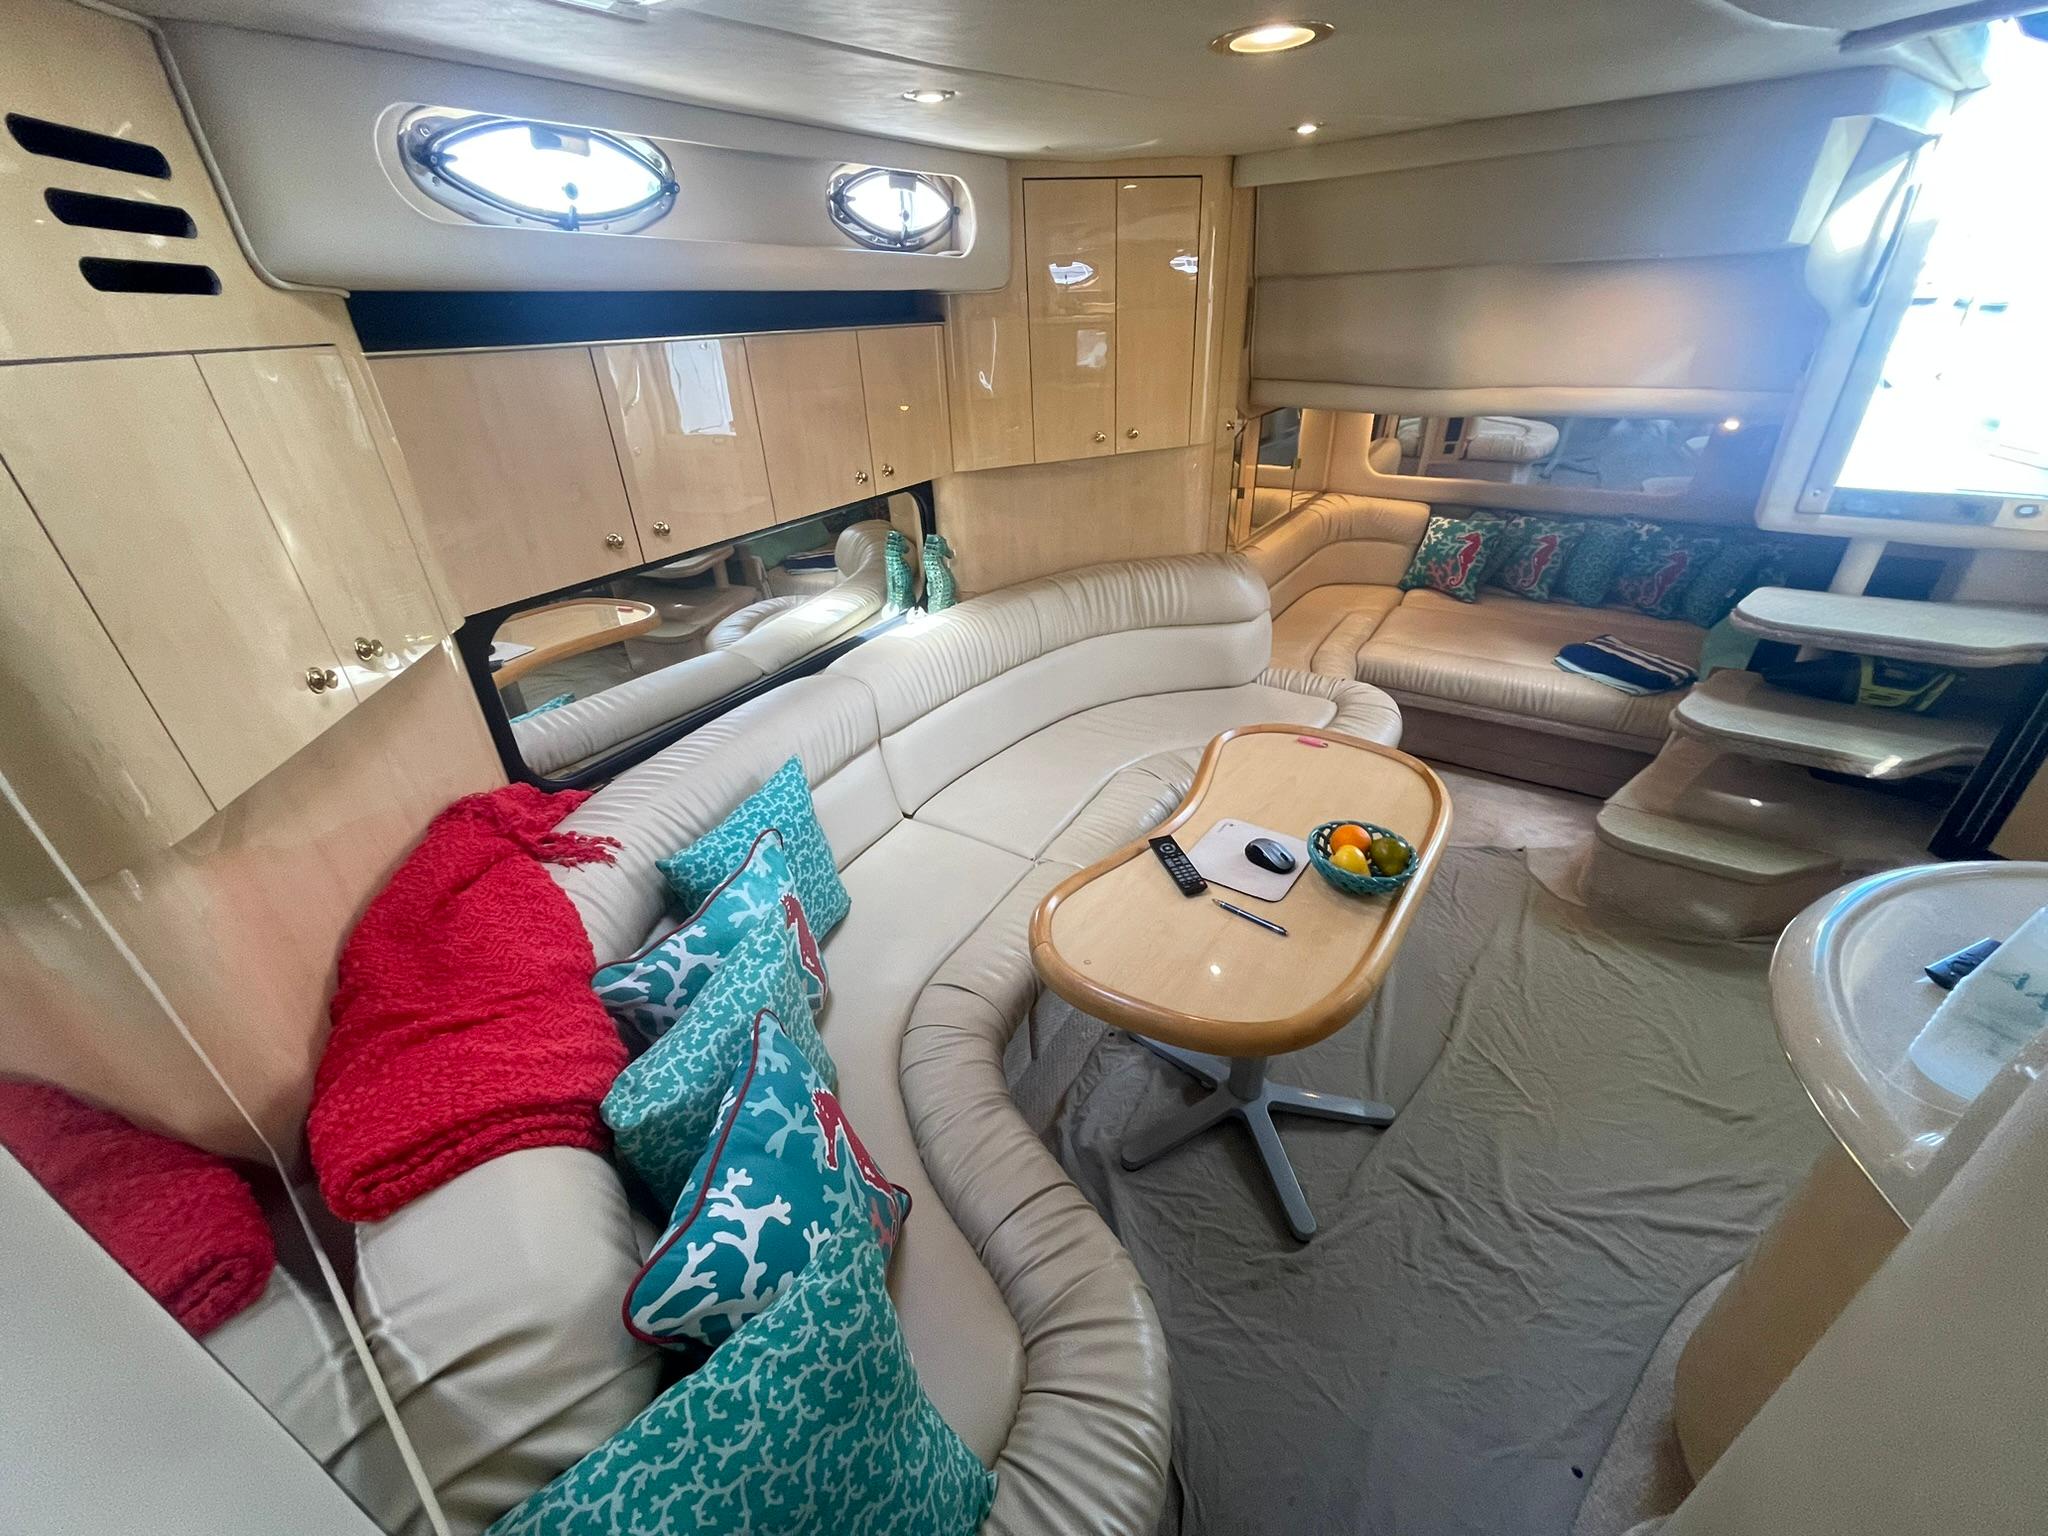 CRESENT SHAPED DINETTE LOOKING AFT